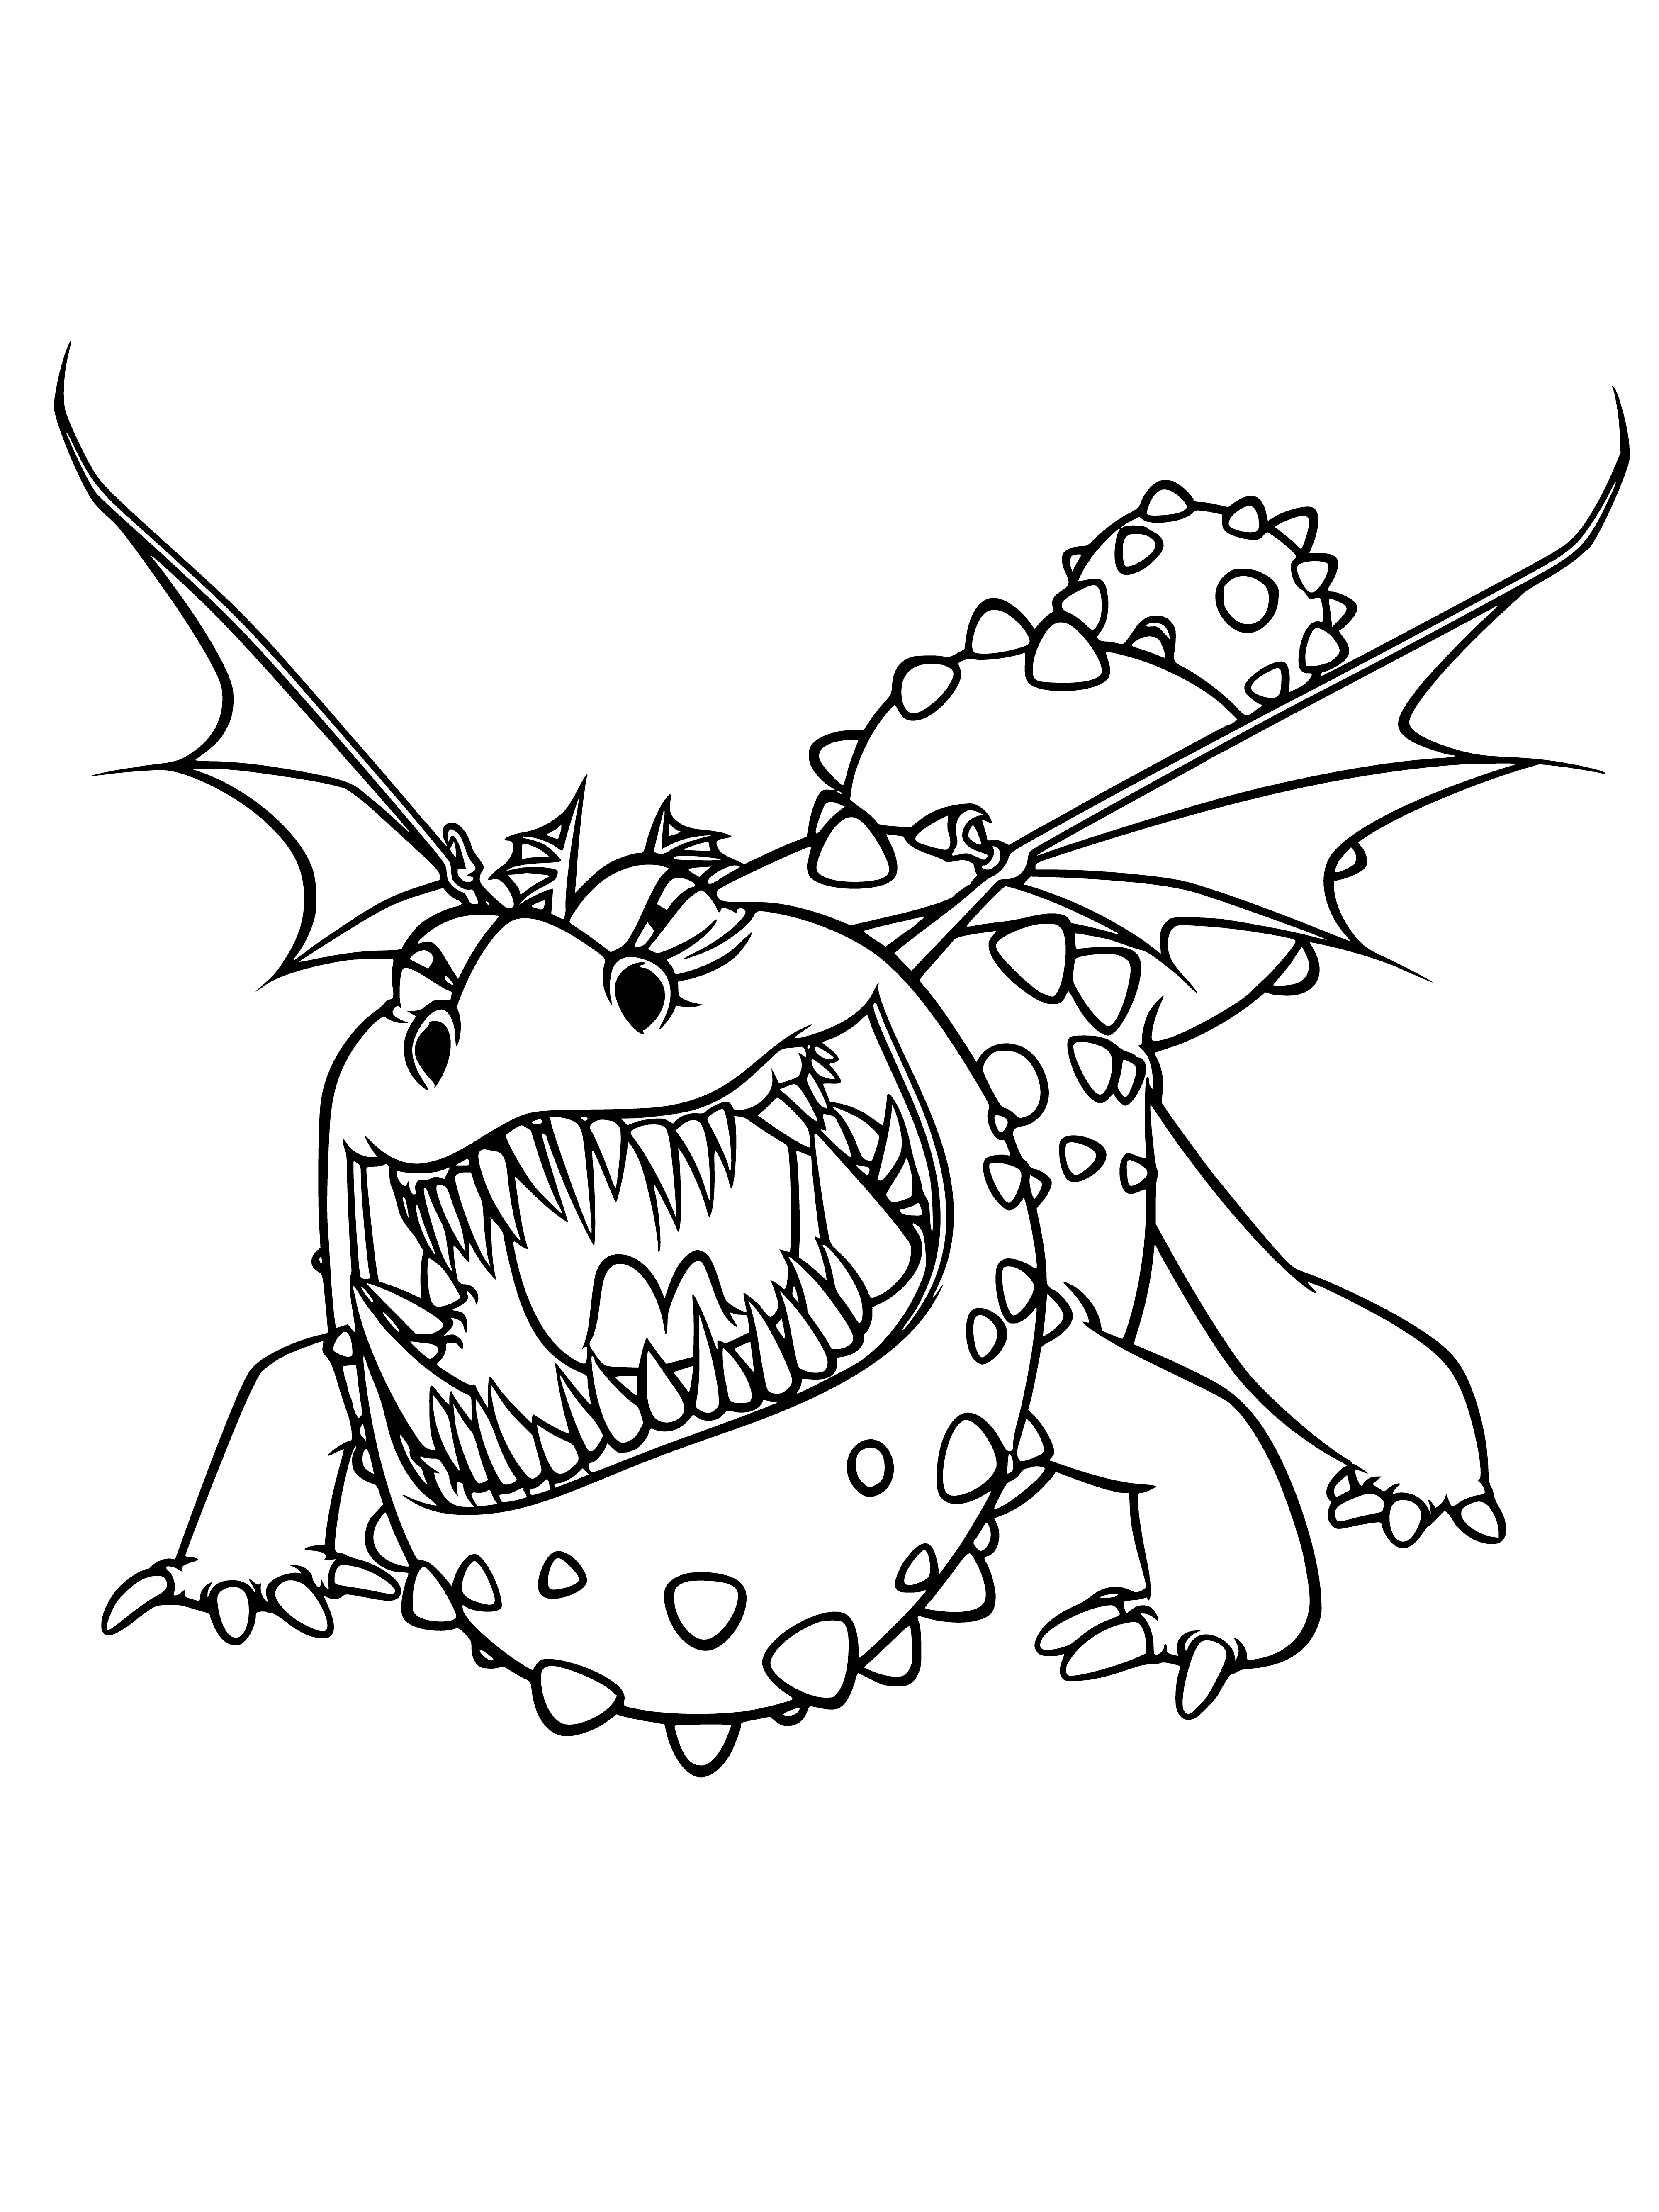 Dragon Grommel coloring page